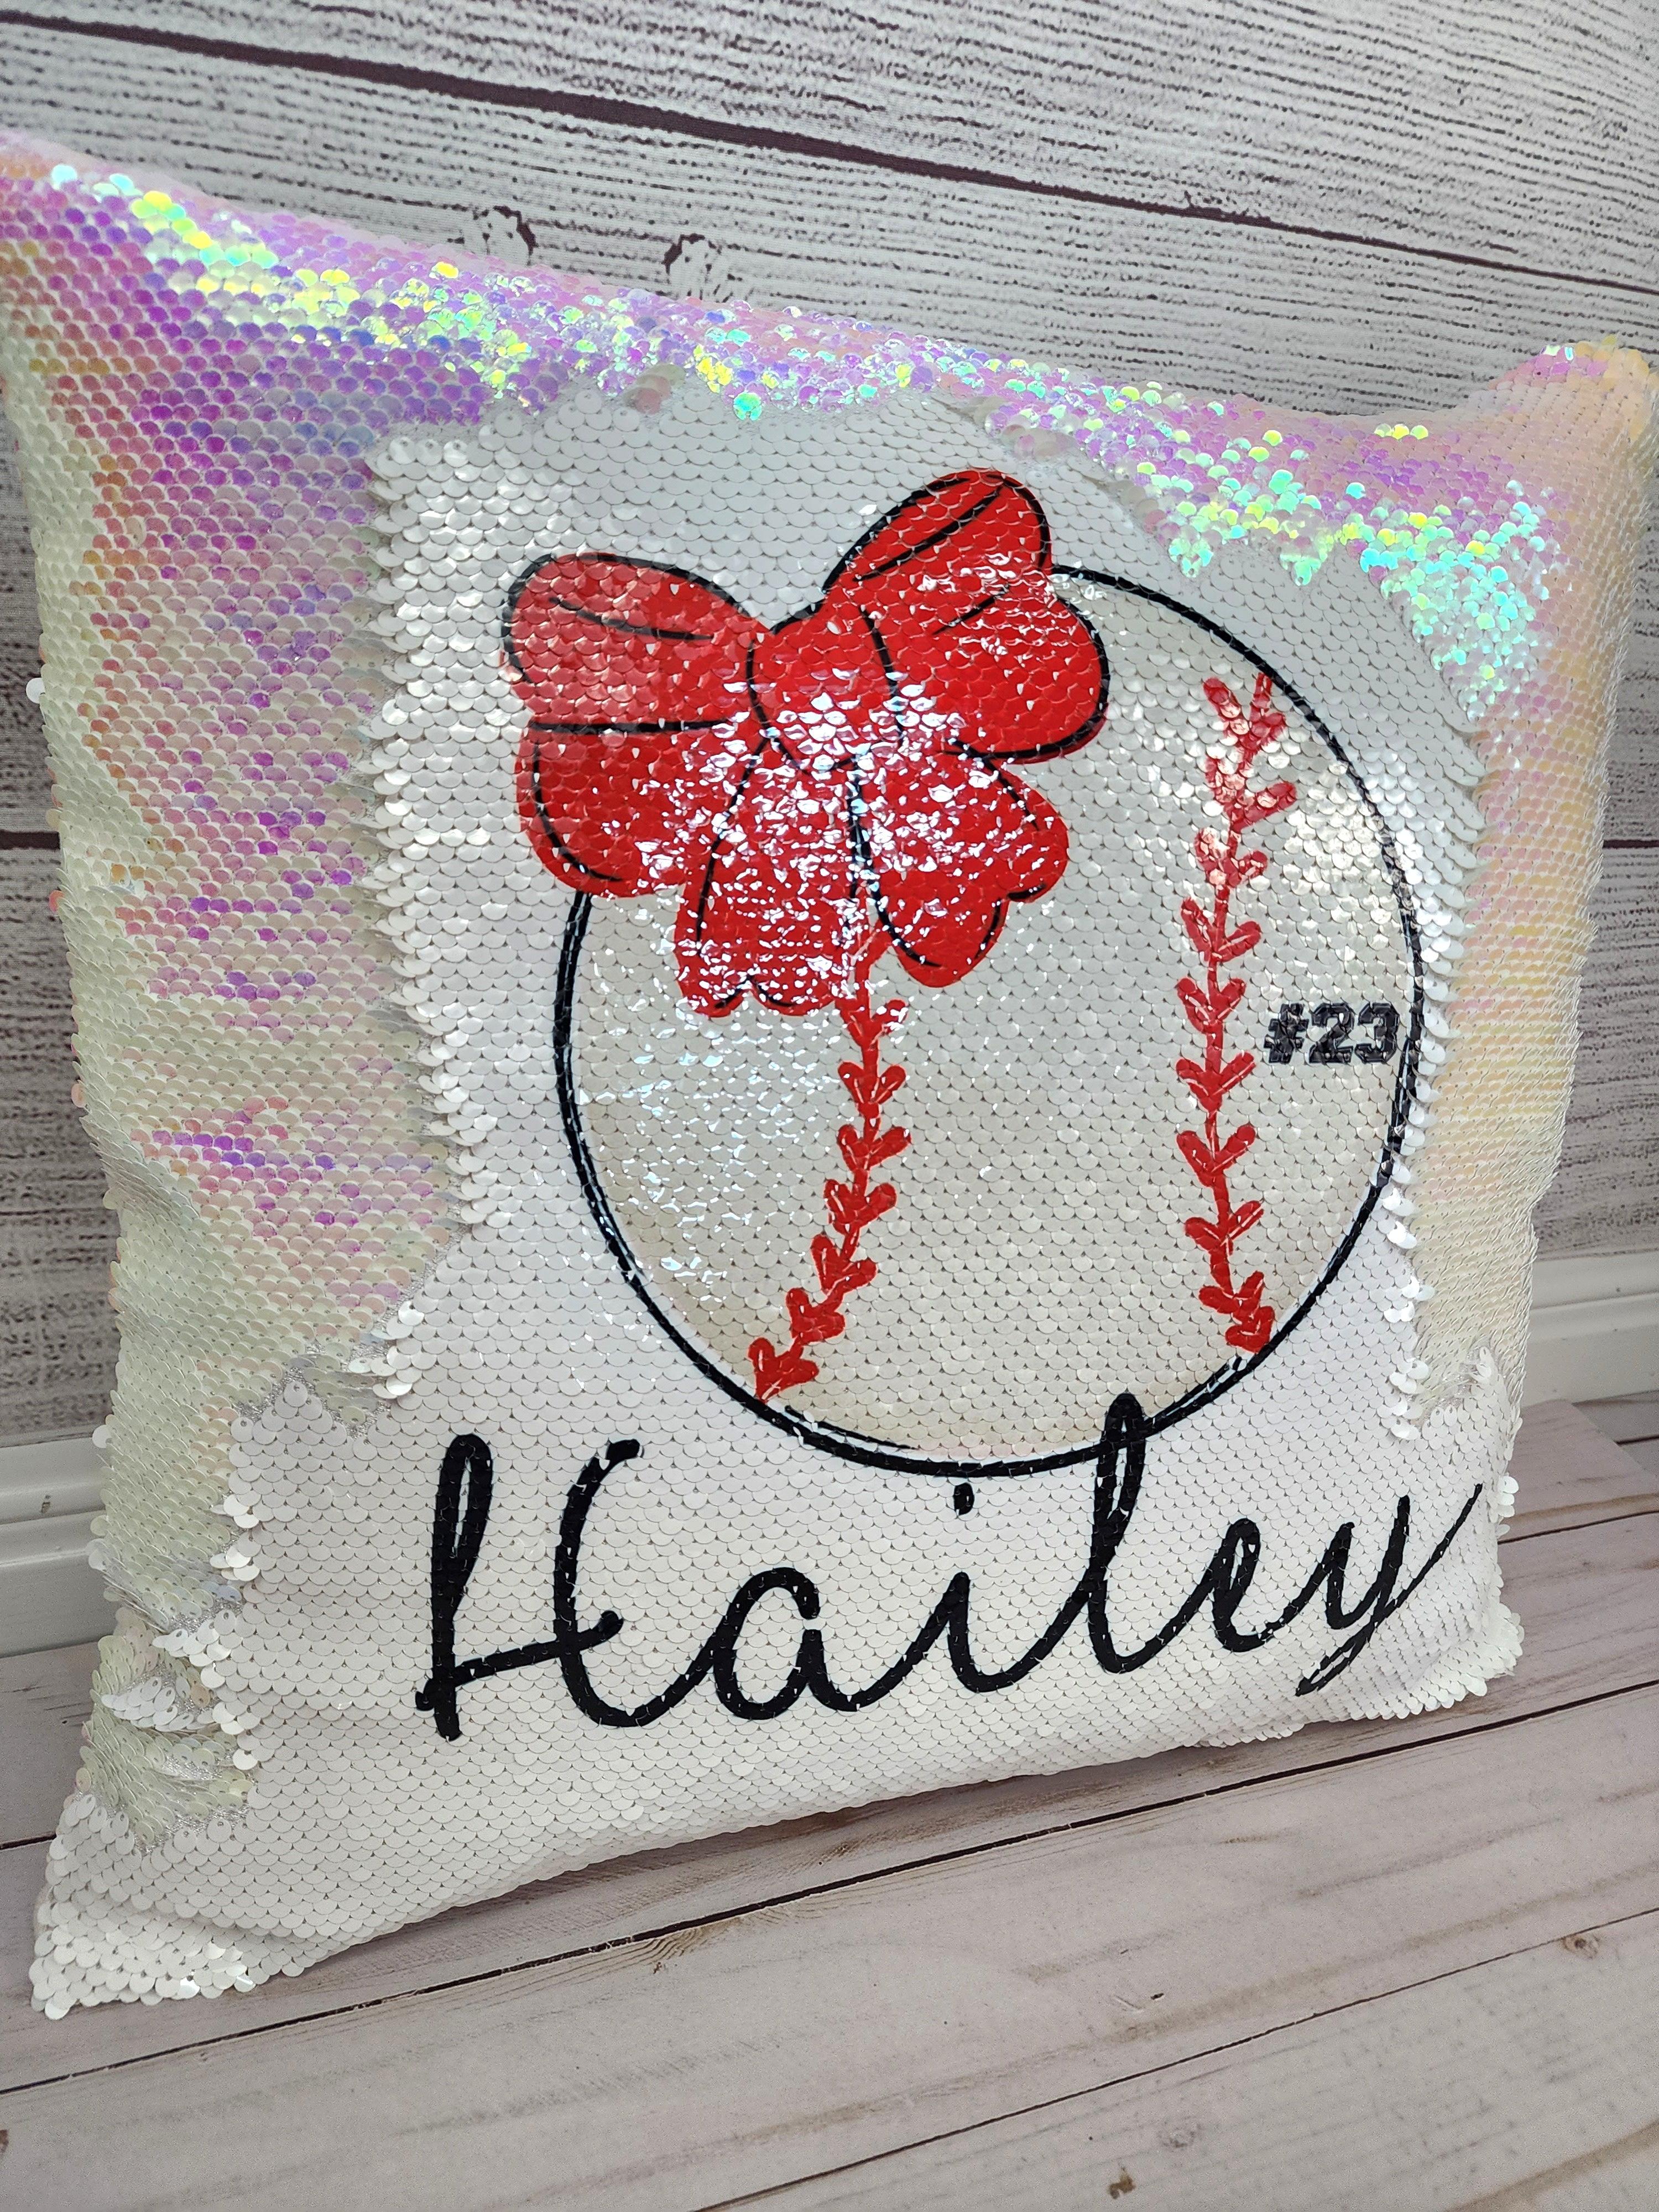 Softball and Sports Birthday Gift for Girls, Softball pillow case personalized Sequin Throw Pillowcase Custom Reversible Pillow Decorative Cushion Pillow Cover lover gift | Gift for child with Sensory Needs and or Autism | Gift for 5 year old Girls | Gift for Girls | Gift for 2 3 4 5 6 year old girls | Personalized Sequin Decor | Birthday Girl Gift Personalized Pillow for Girls | Gift for Birthday Theme Party Supplies